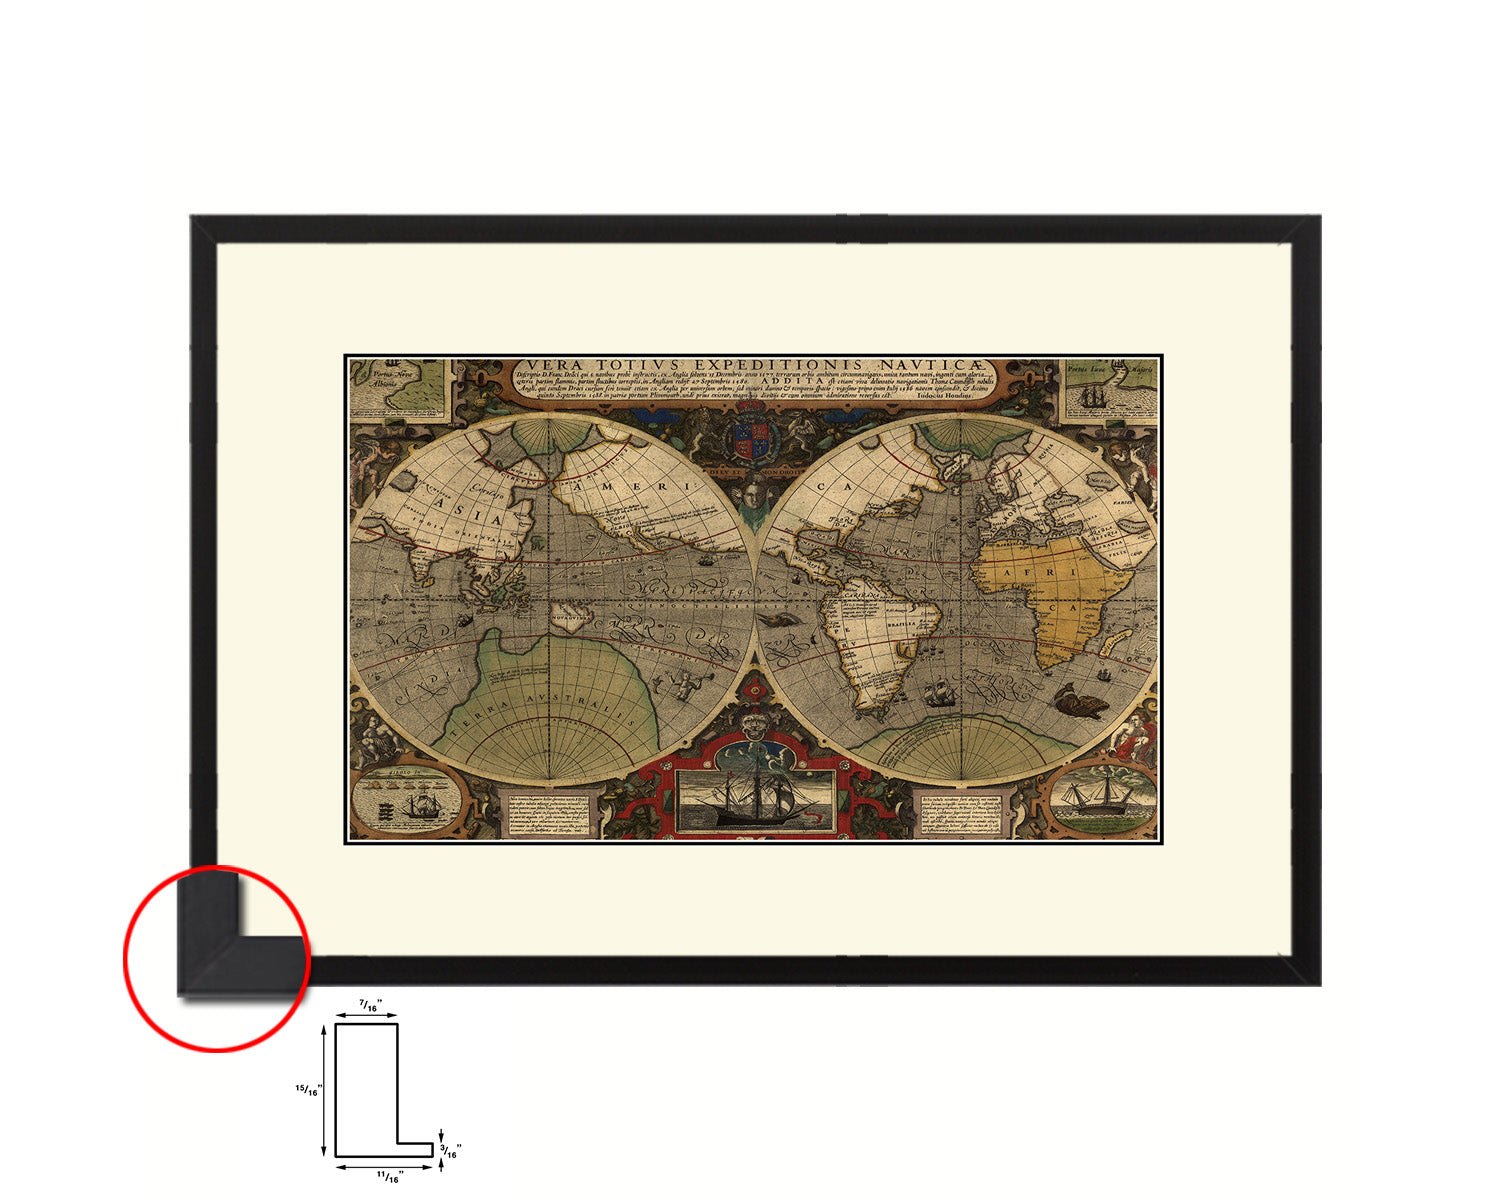 Vera Totius Expeditionis Nautica Double Hemisphere World Old Map Framed Print Art Gifts